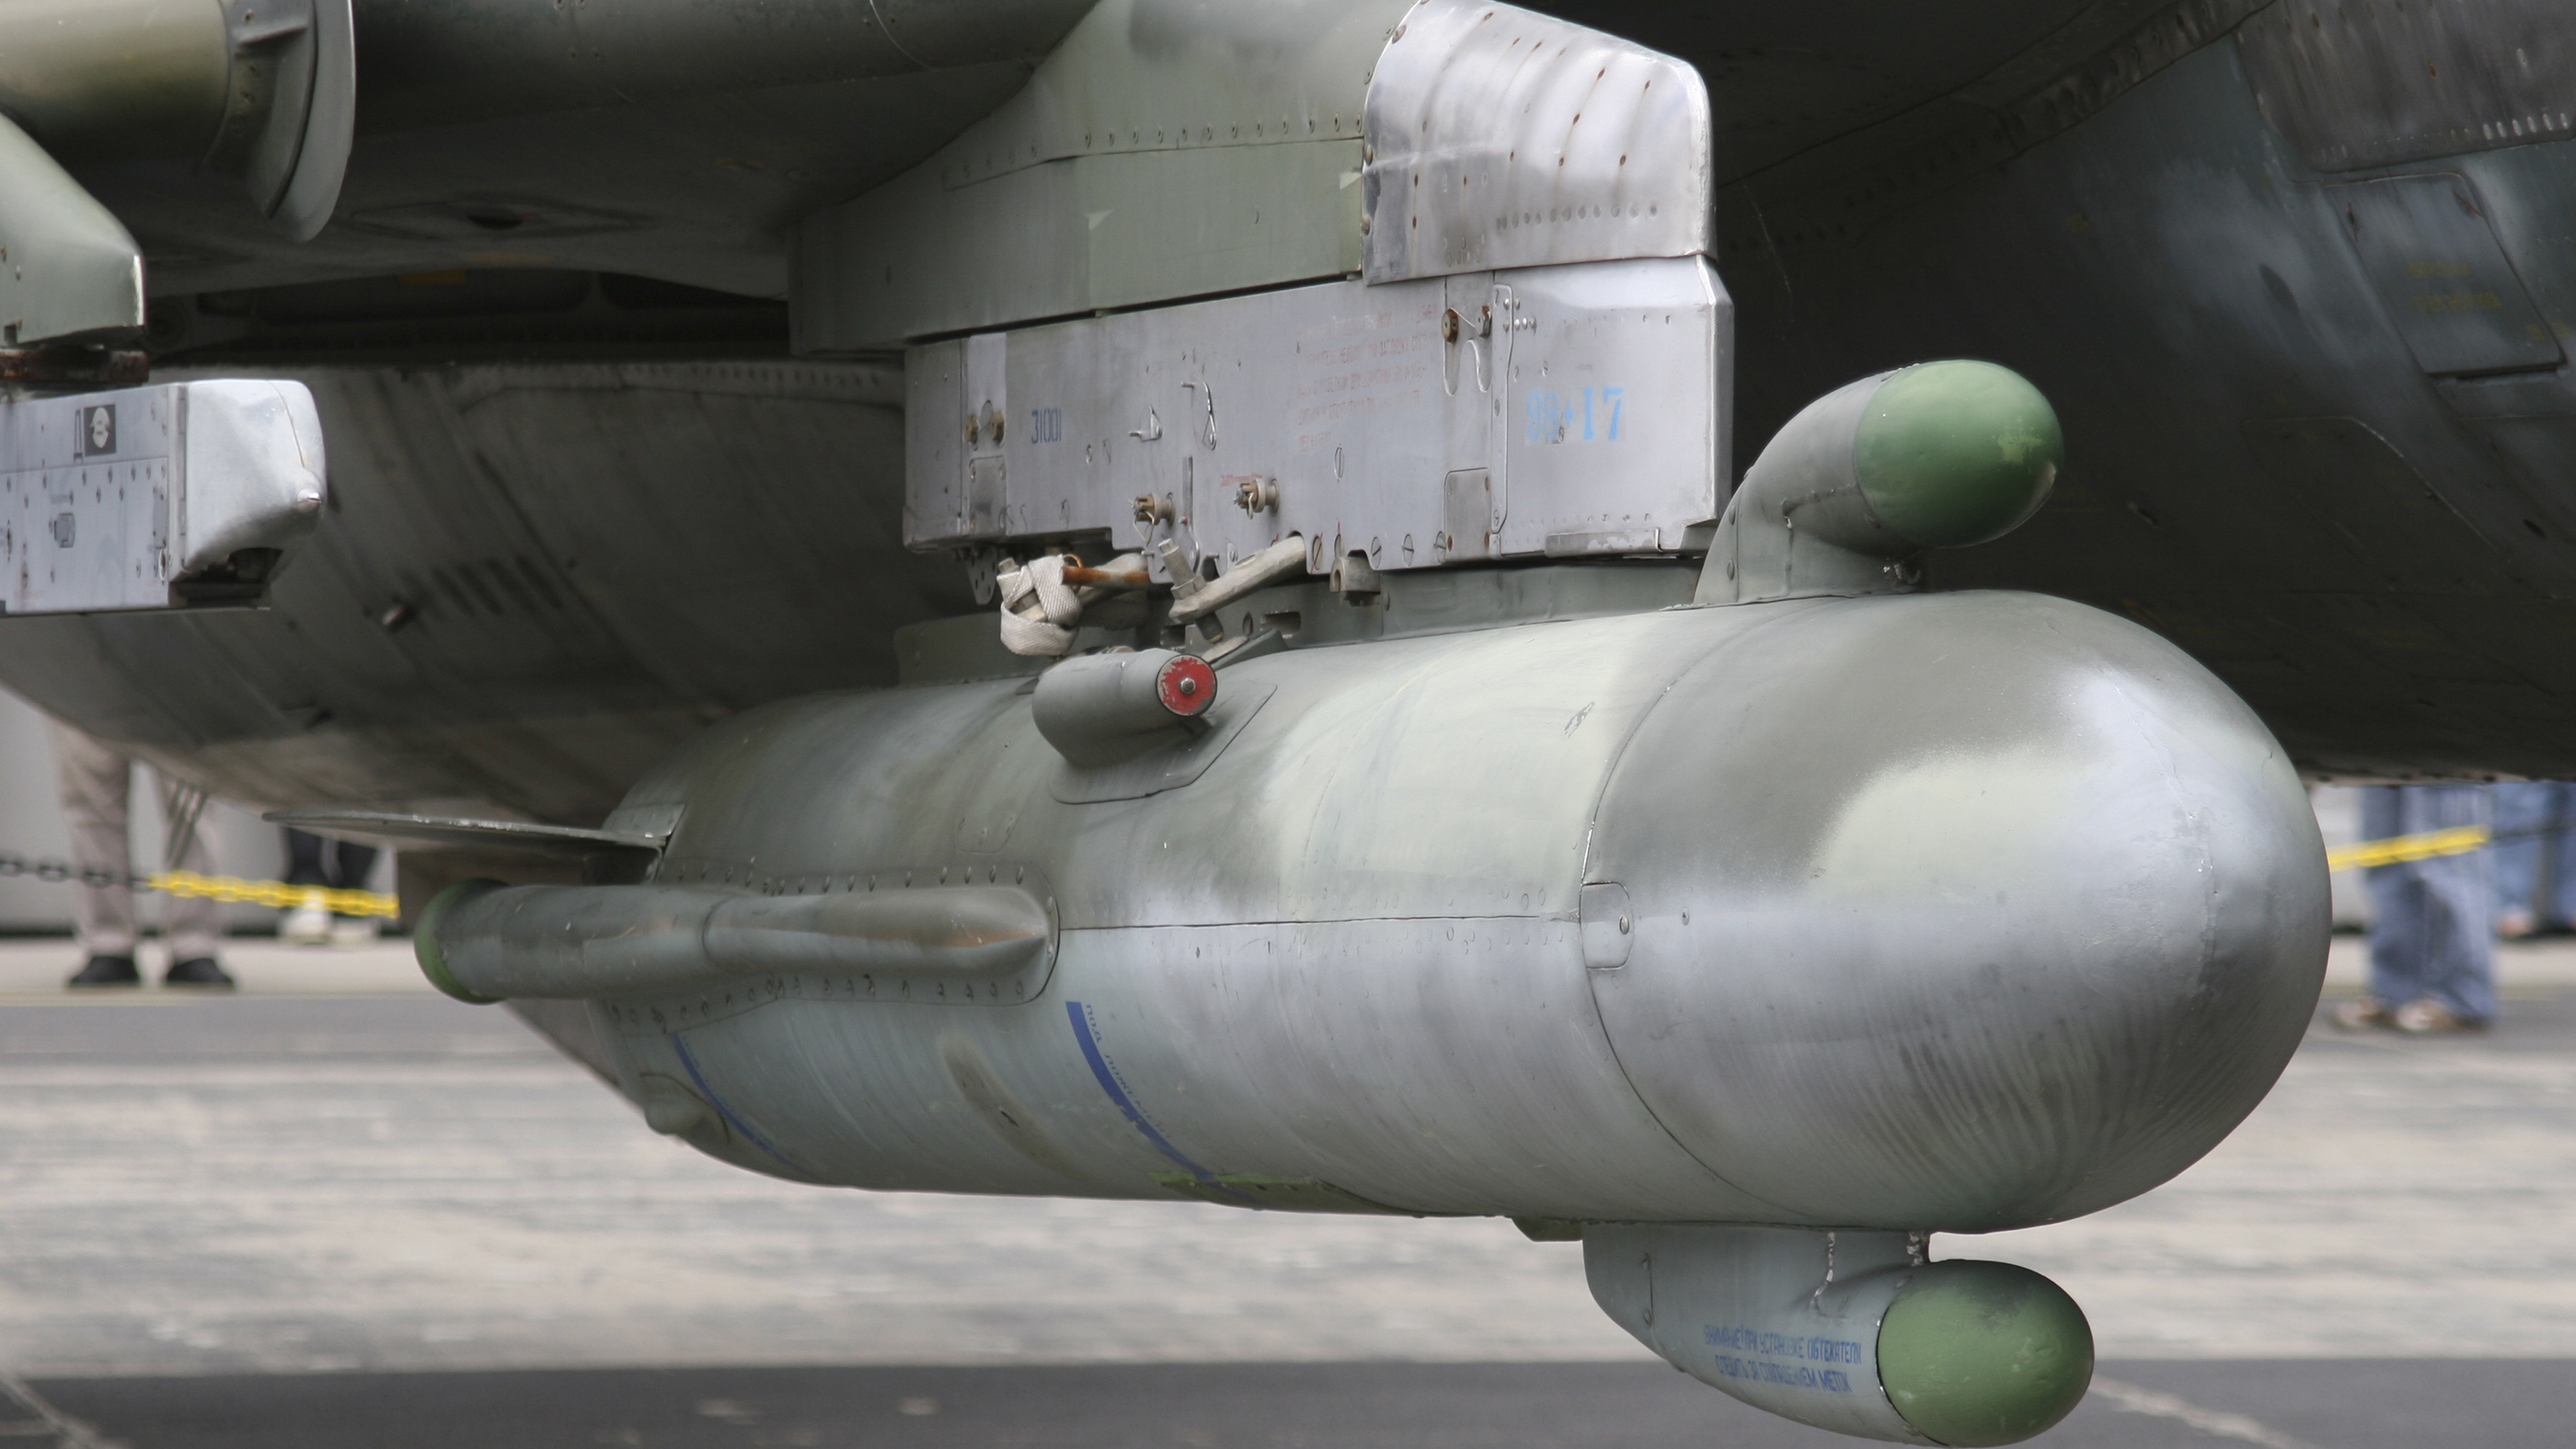 Here, a close-up of a Russian SPS-141 jamming pod for electronic countermeasures, which is mounted on a Sukhoi Su-17 aircraft at Manching Air Base, Germany.